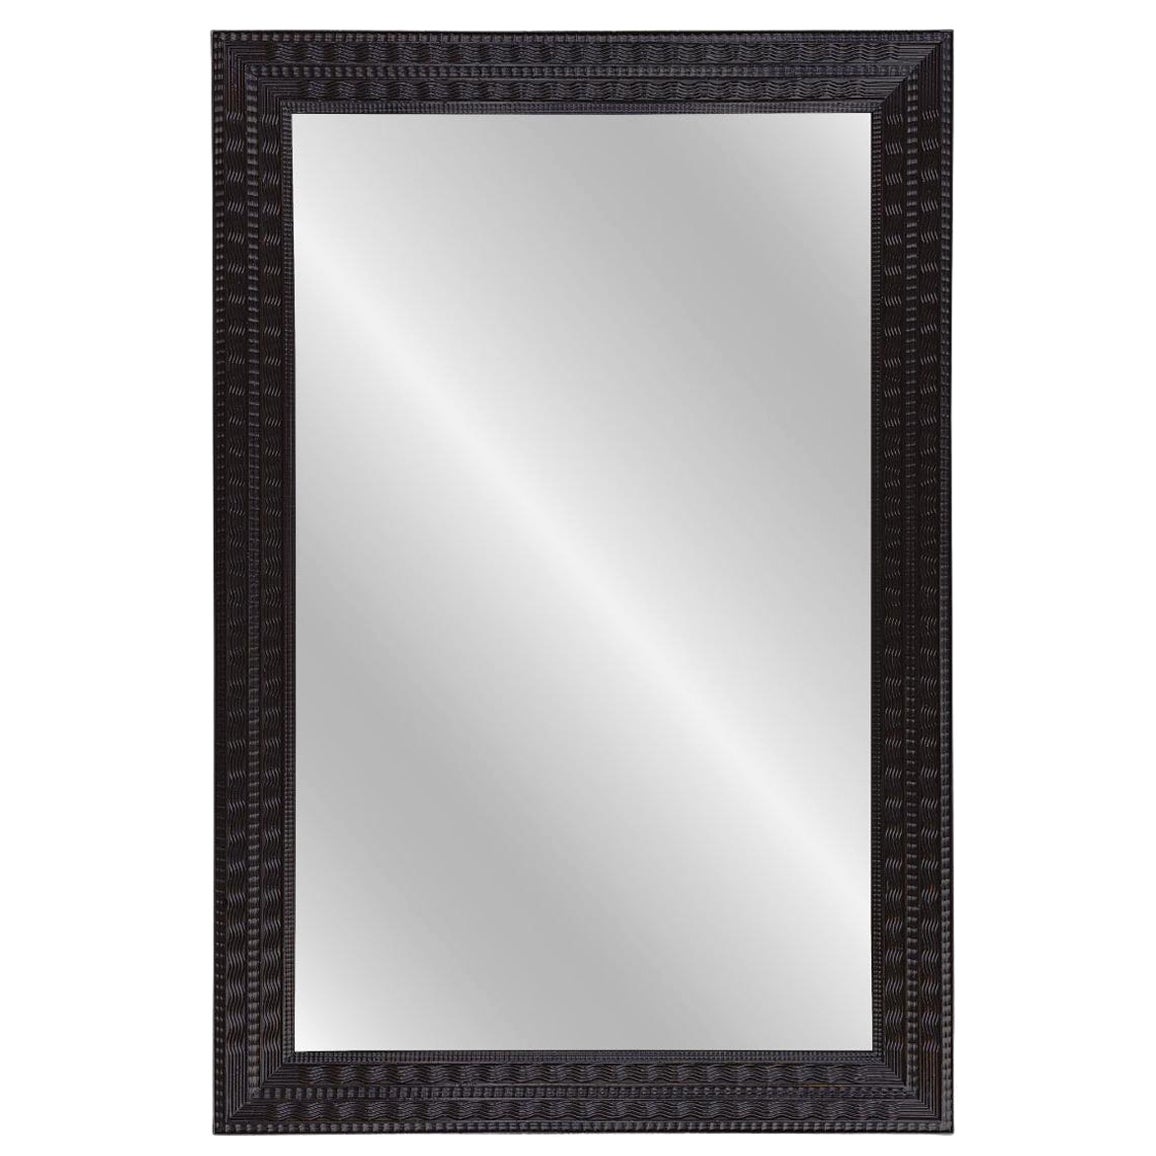 Broust Mirror with Dutch Inspired Moldings For Sale